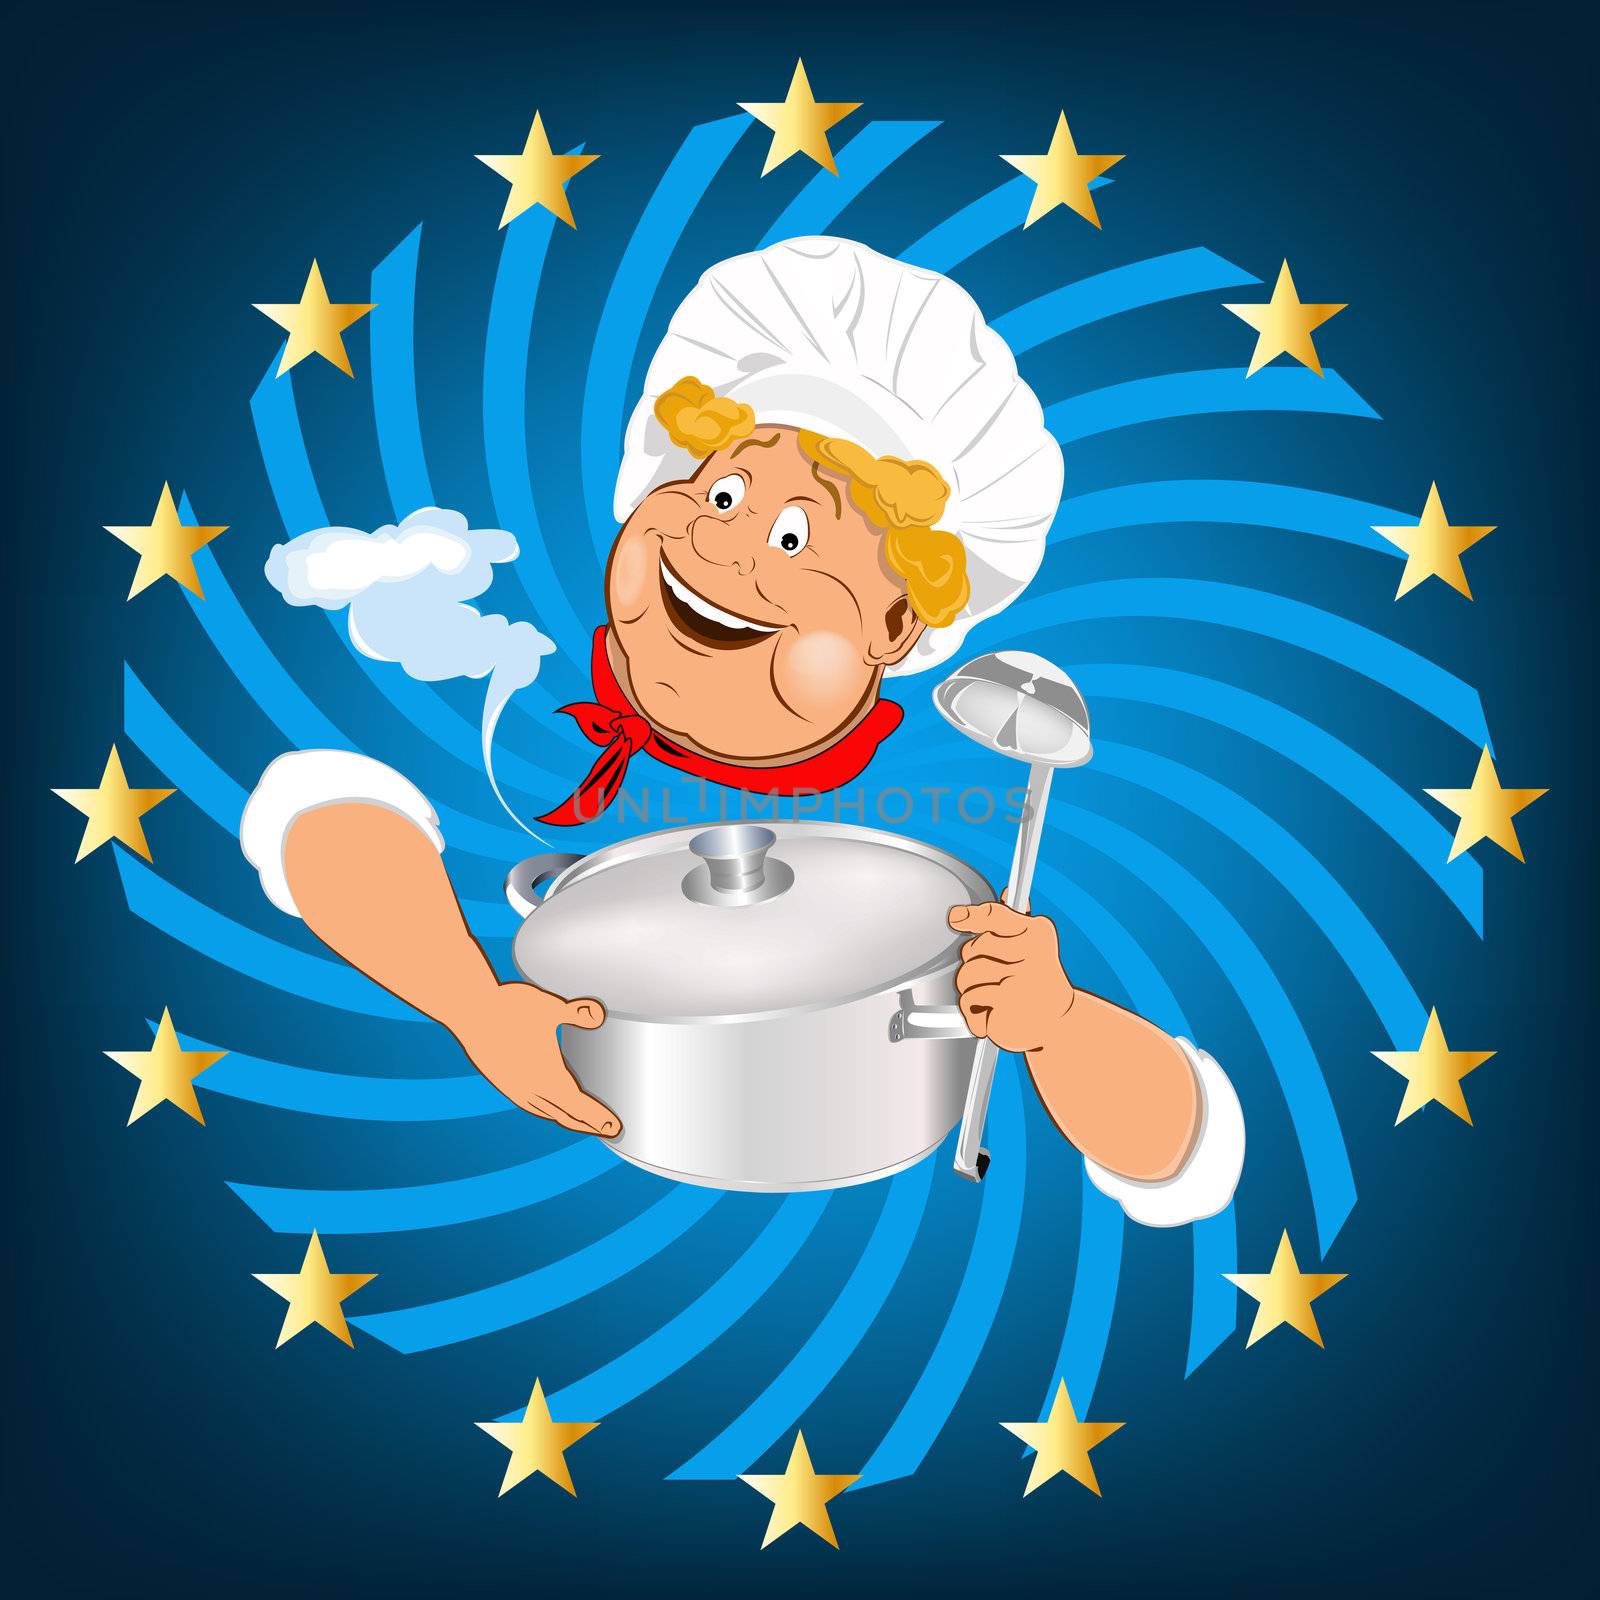 Funny Chef and big saucepan with spoon.Emblem healthy food by sergey150770SV